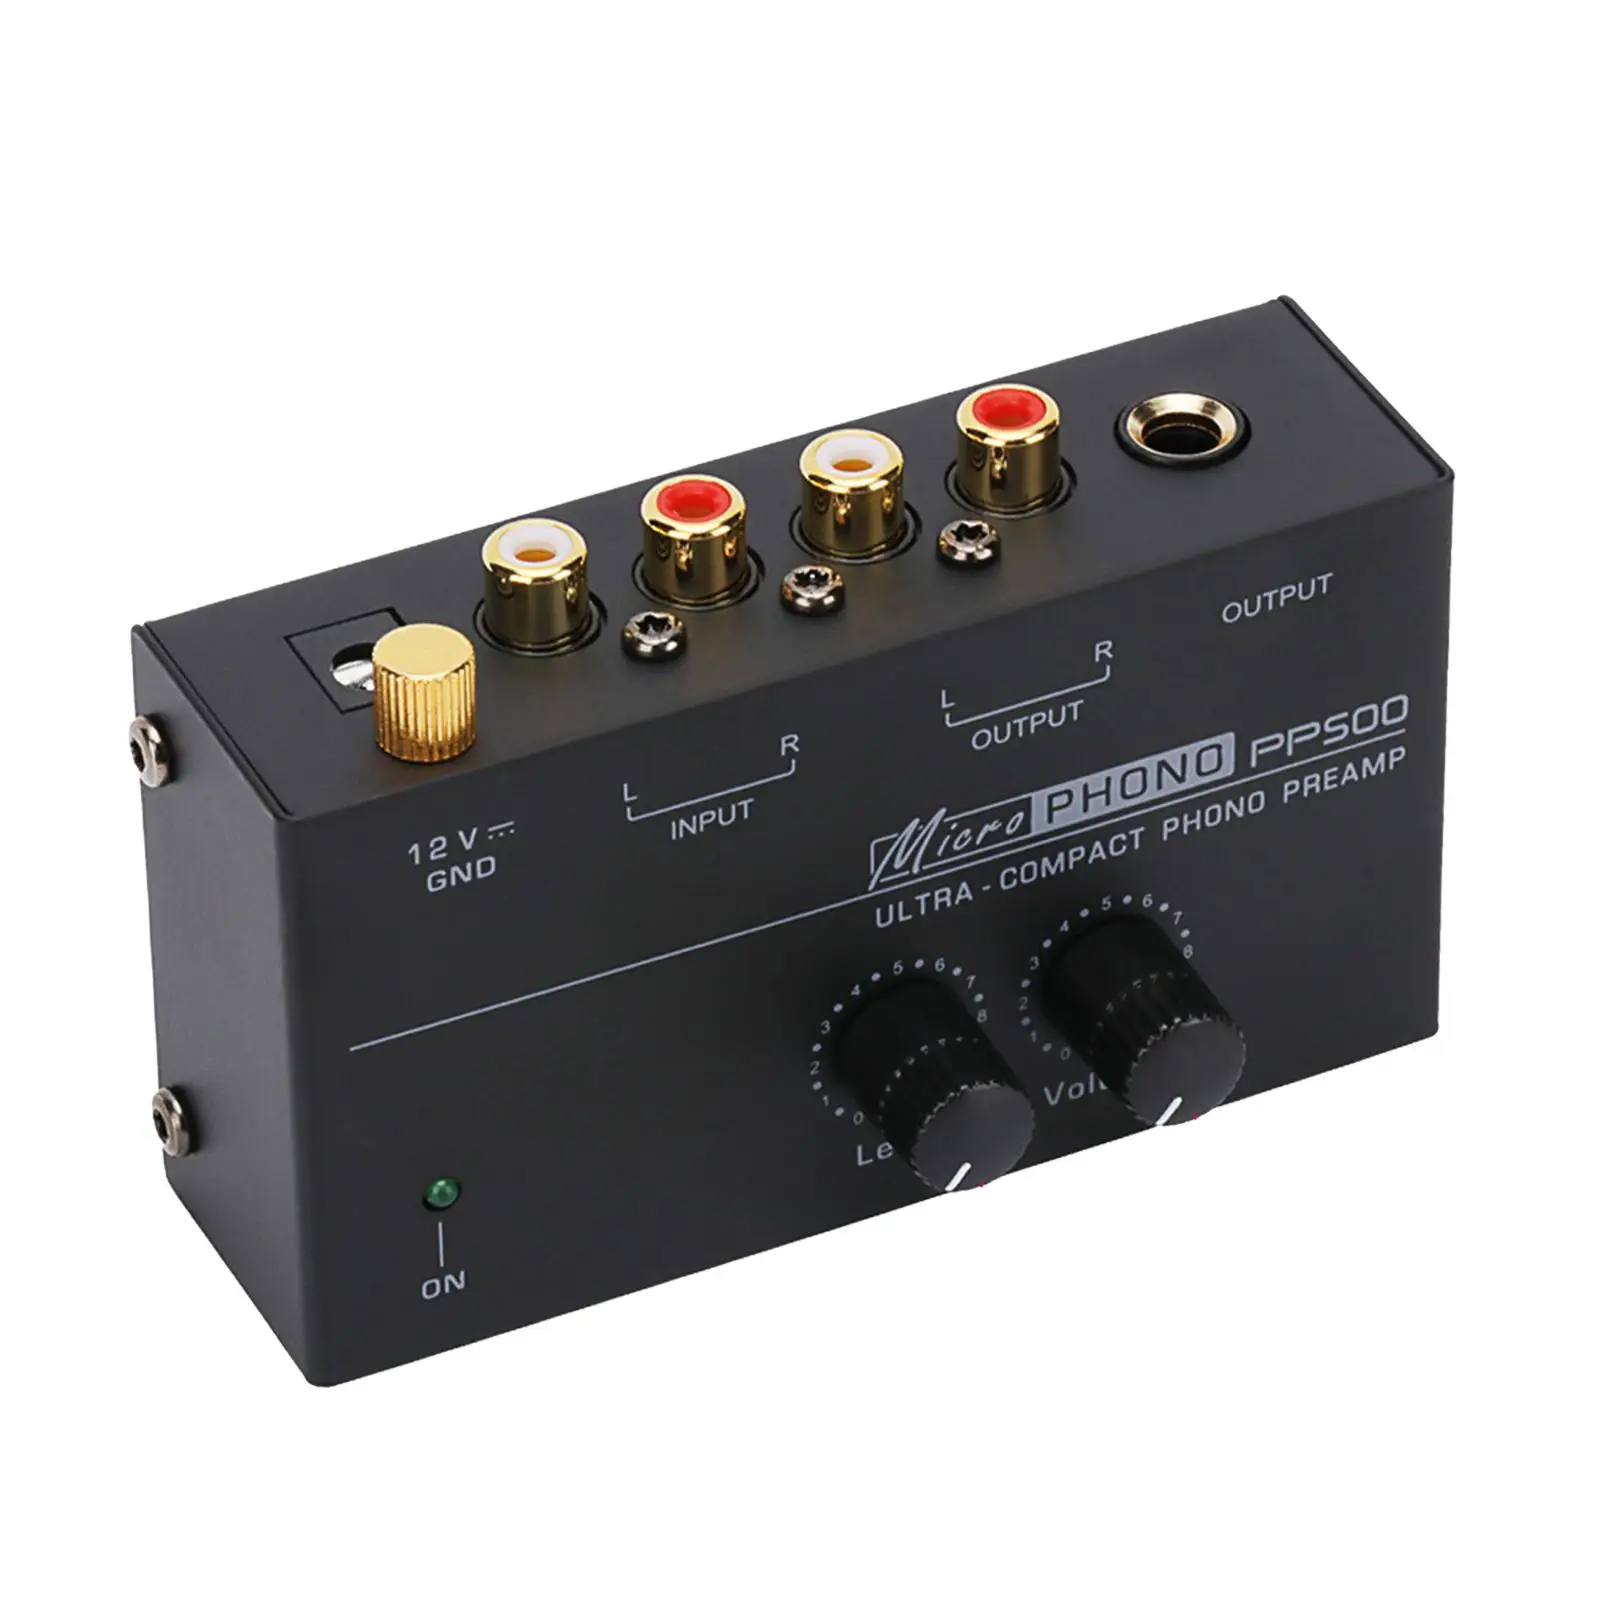 Phono Preamp for Turntable RCA Input, RCA Output DC 12V Compact Record Player Preamplifier Phonograph Preamplifier for Computers